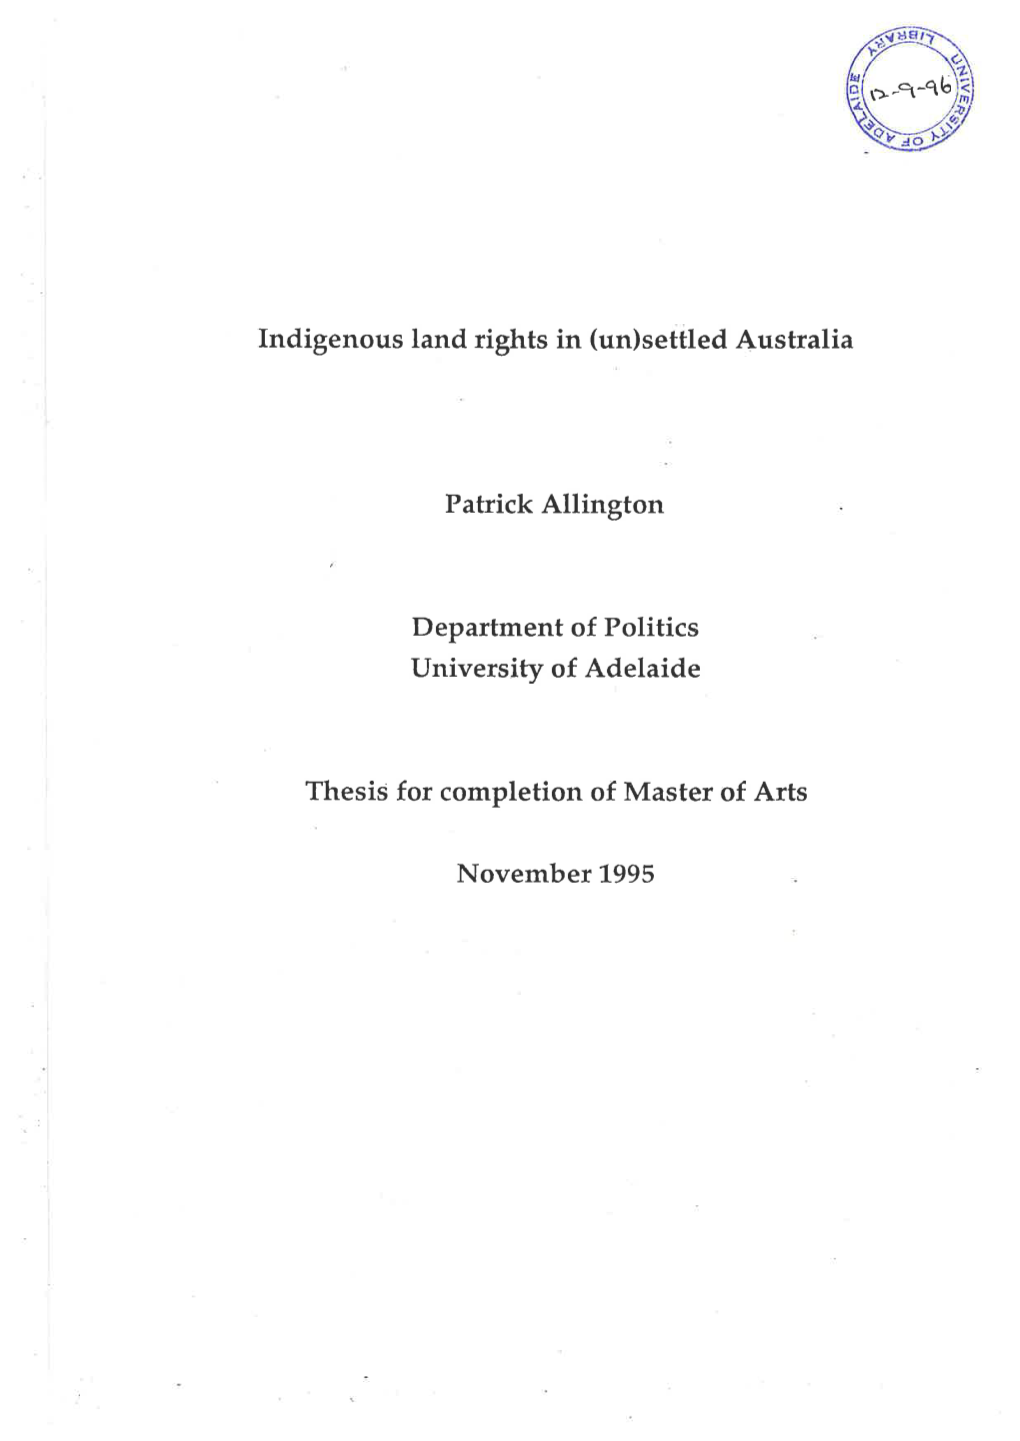 Indigenous Land Rights in (Un)Settled Australia